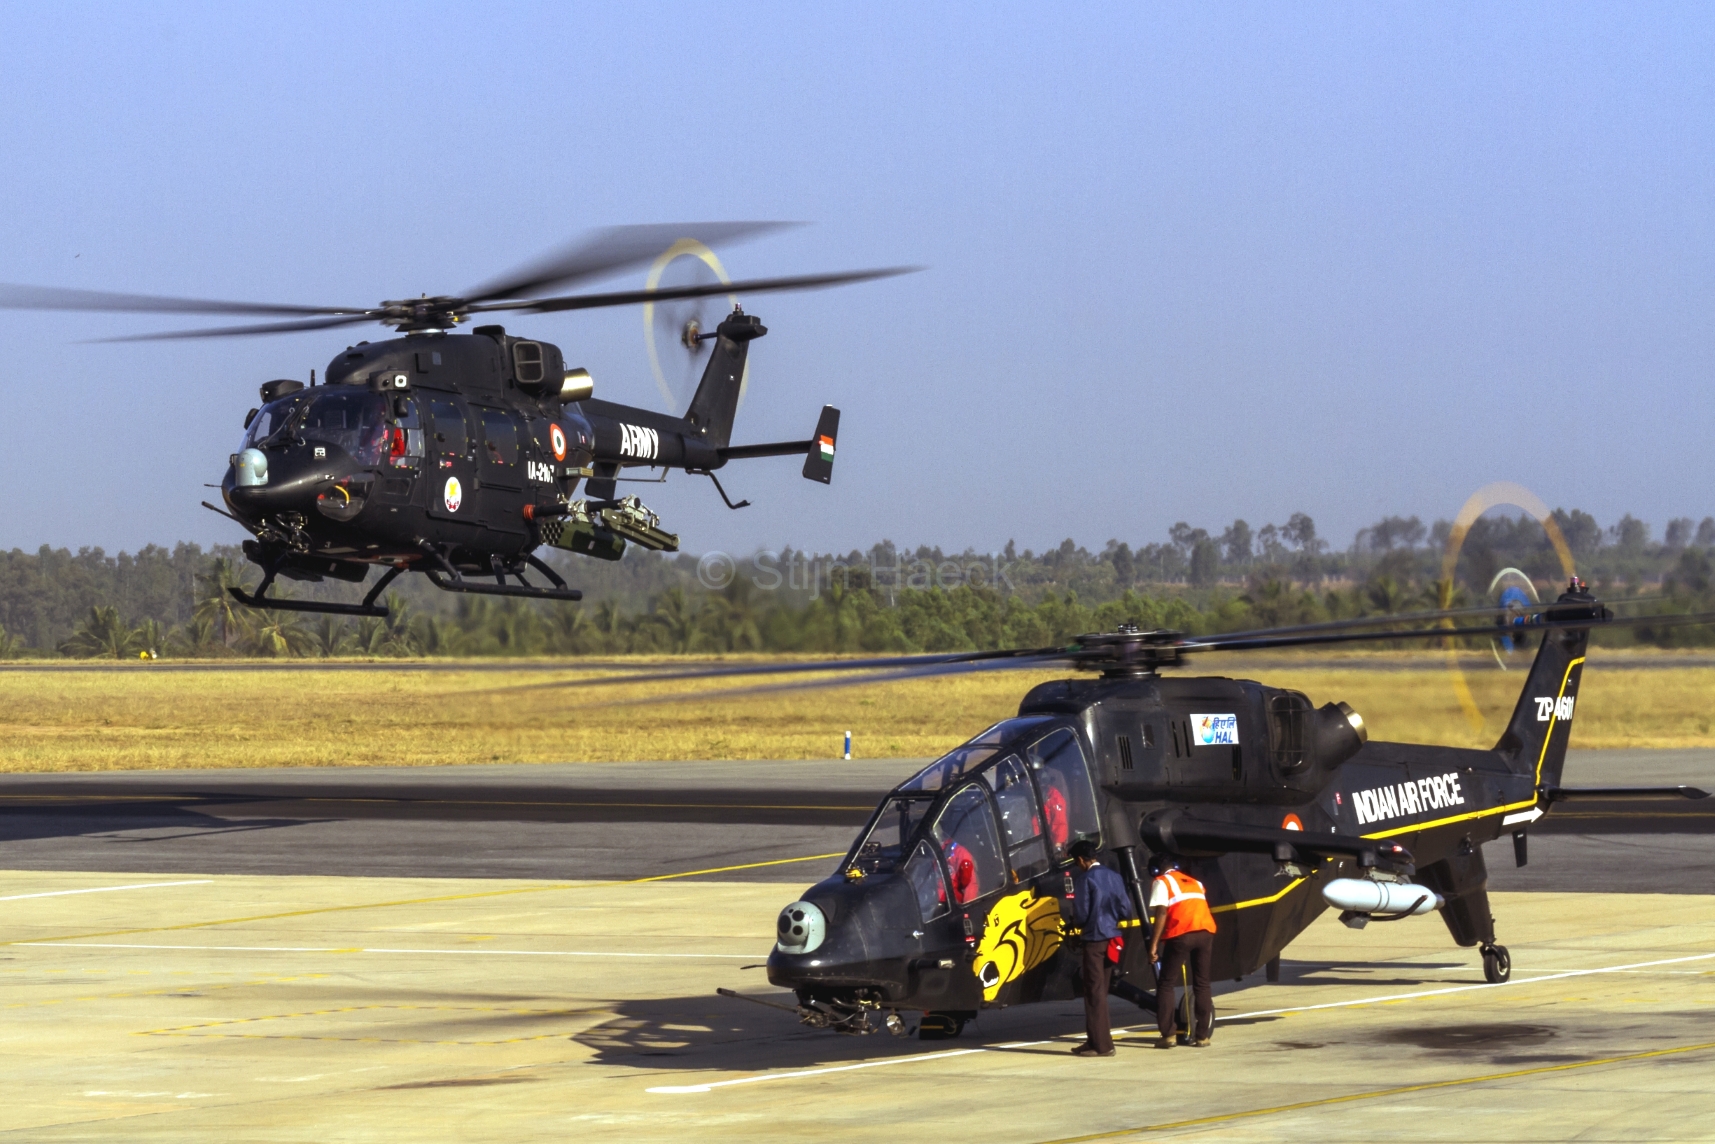 General 1715x1144 HAL Rudra HAL Light Combat Helicopter (LCH) helicopters Indian Army India Indian air force military military aircraft watermarked Indian aircraft